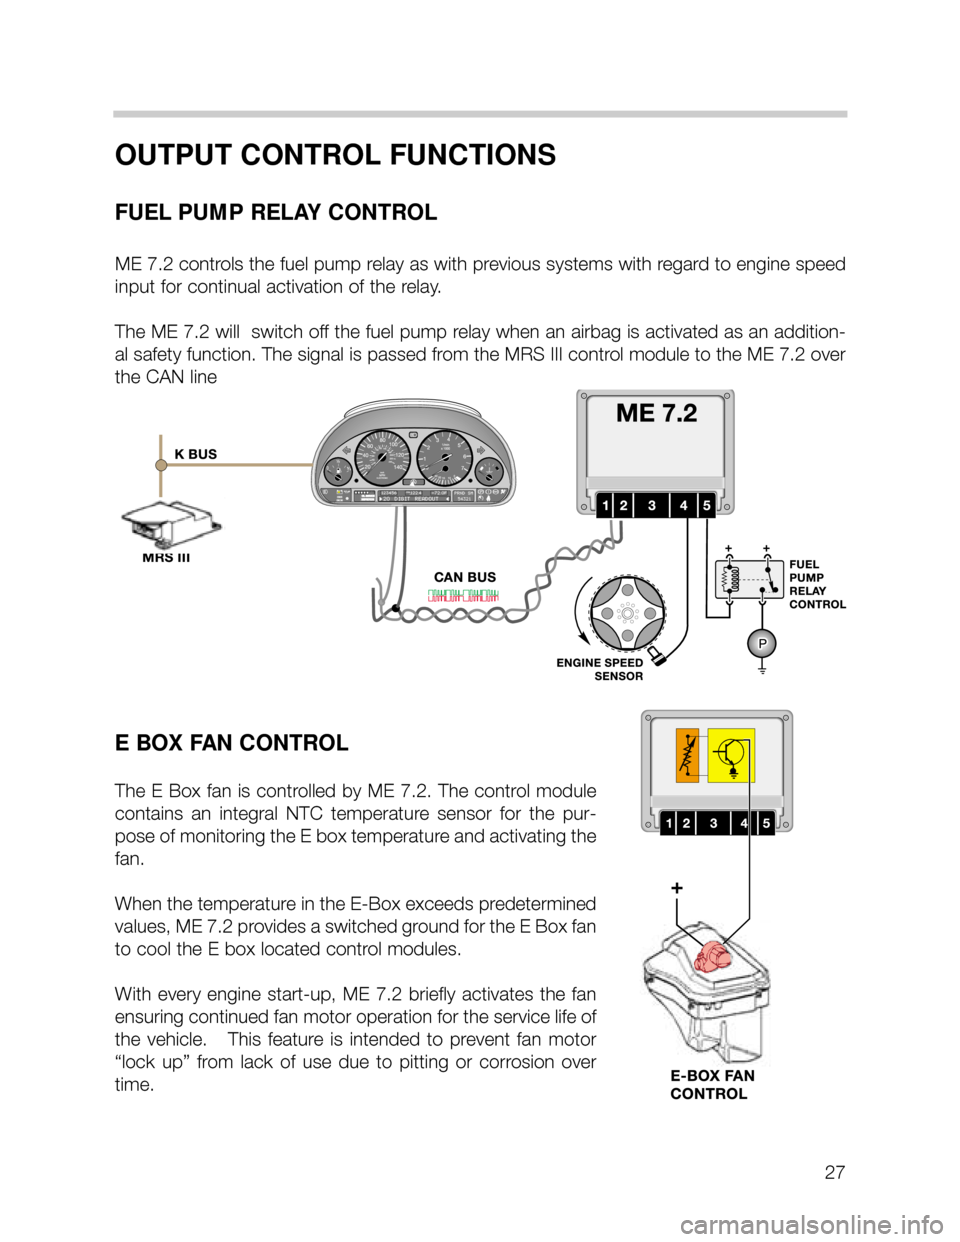 BMW X5 2006 E53 M62TU Engine Owners Manual 27
OUTPUT CONTROL FUNCTIONS
FUEL PUMP RELAY CONTROL
ME 7.2 controls the fuel pump relay as with previous systems with regard to engine speed
input for continual activation of the relay.  
The ME 7.2 w